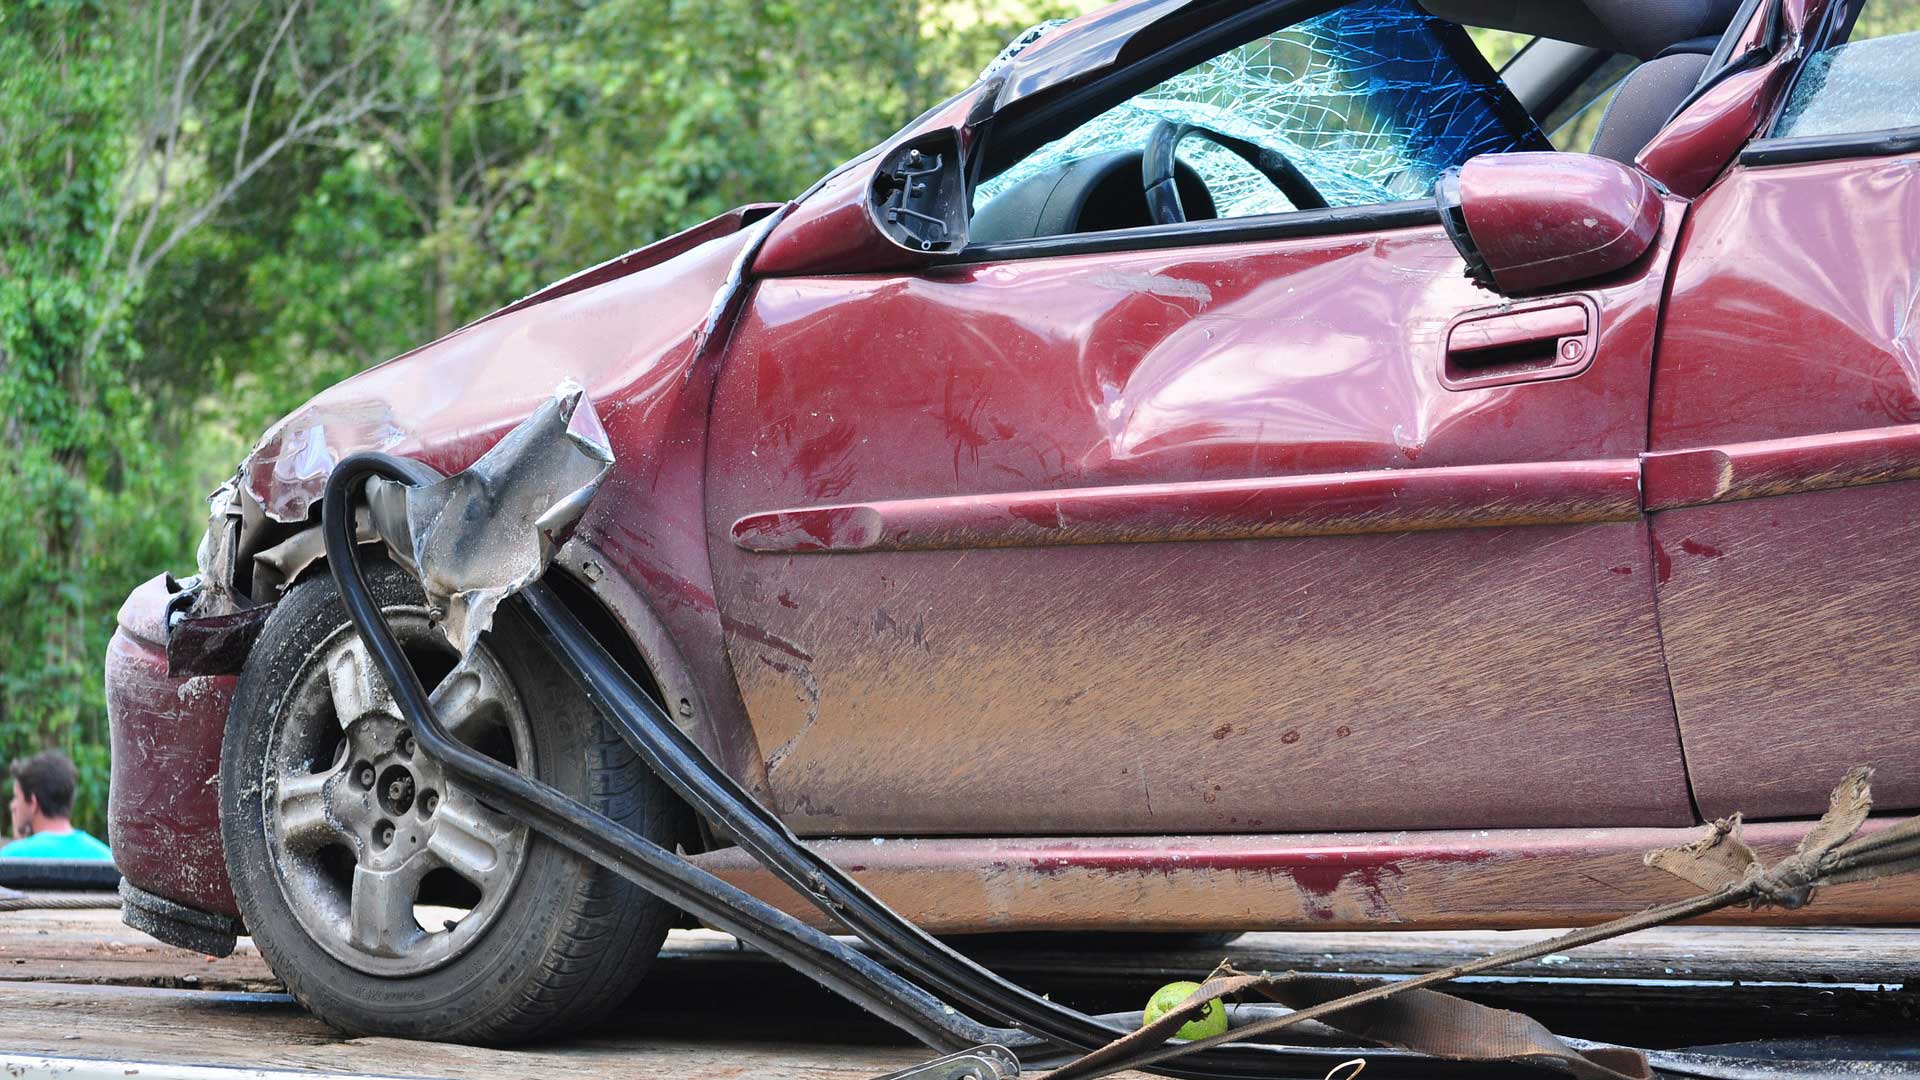 Red car in crash with severe damage